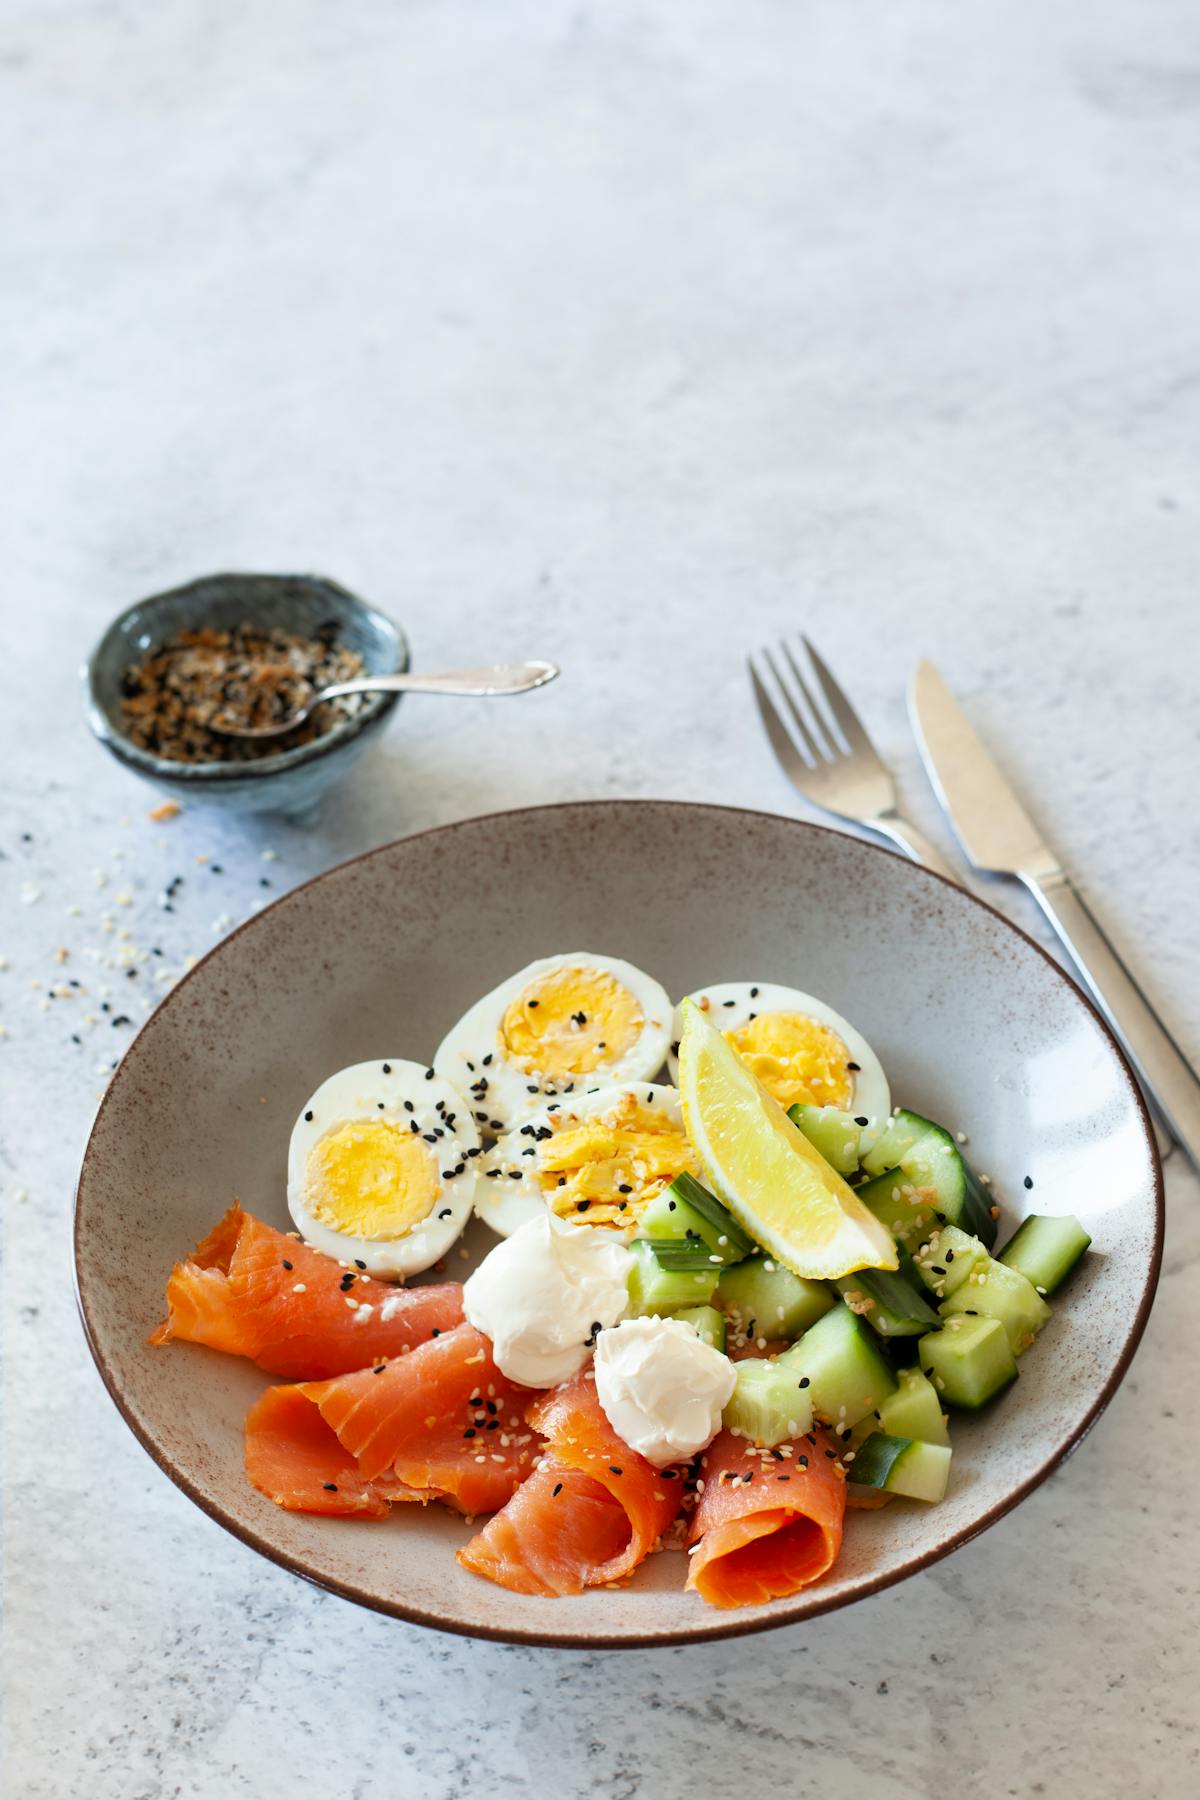 High Protein Breakfast Bowl With Eggs &amp; Smoked Salmon - Keto Recipe